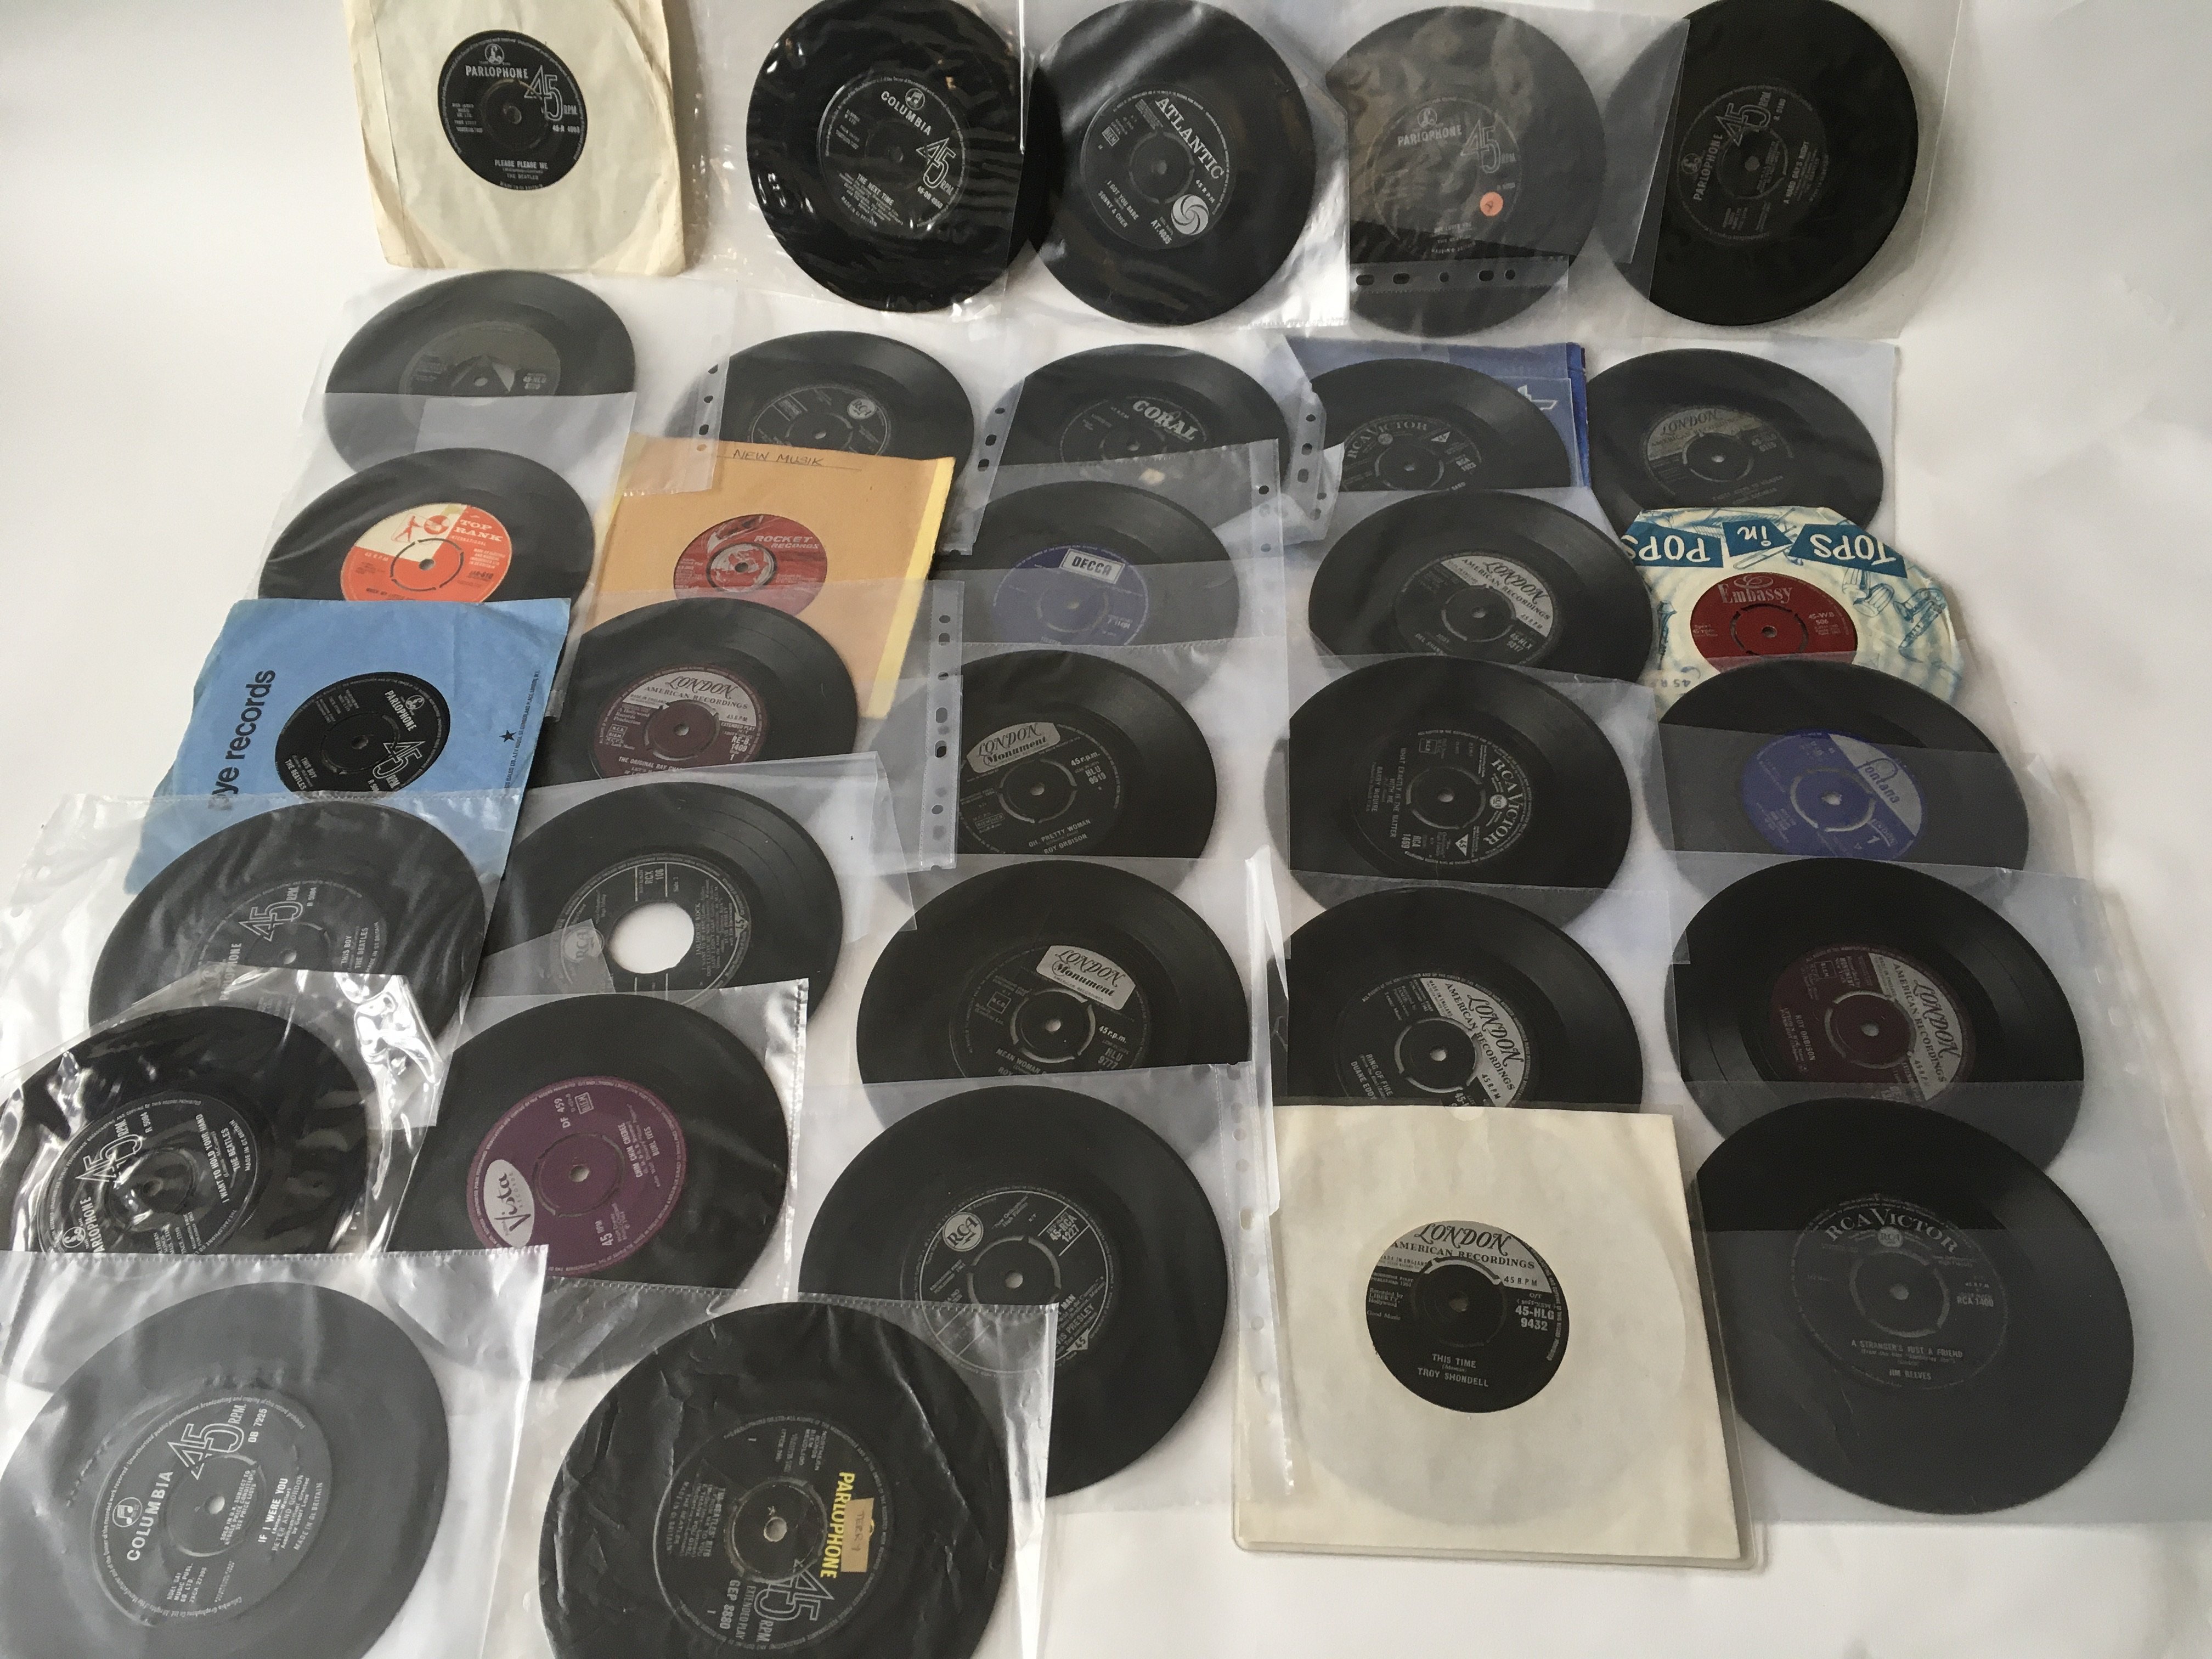 A collection of 7inch singles and EPs by various artists including The Beatles, Elvis Presley, Roy